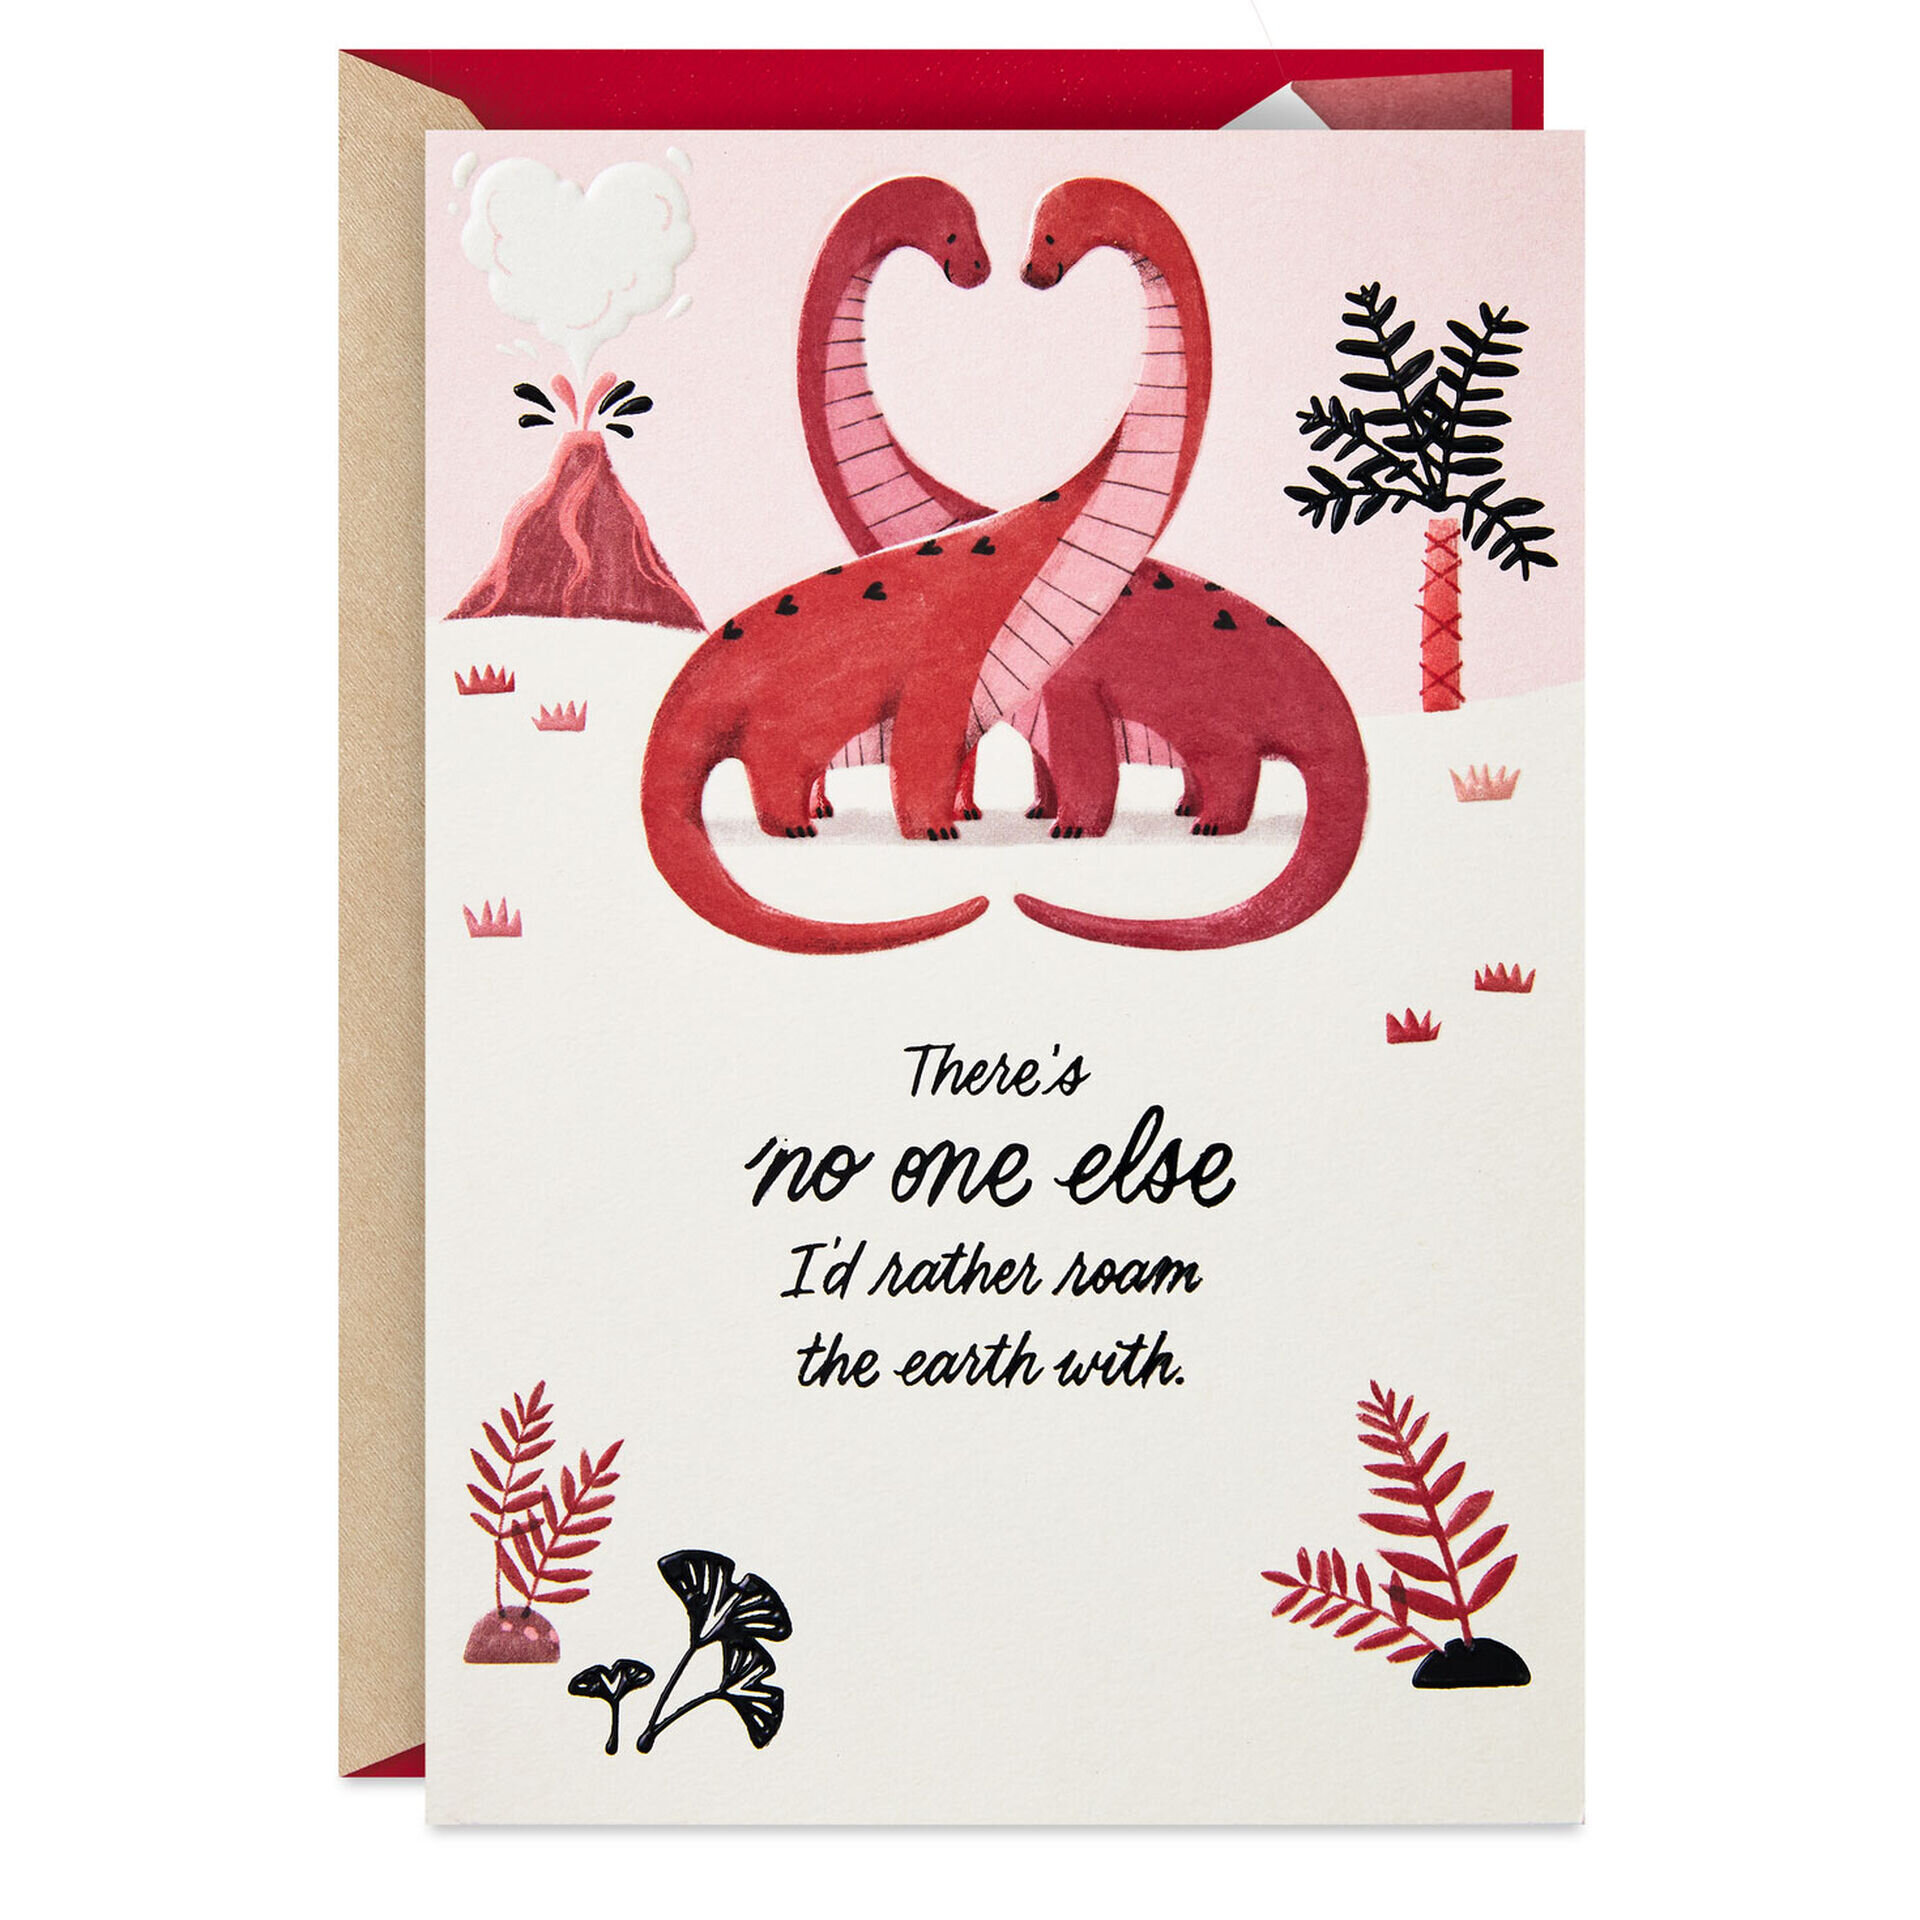 Two-Dinosaurs-Romantic-PopUp-Valentines-Day-Card_499VEE7242_01.jpg